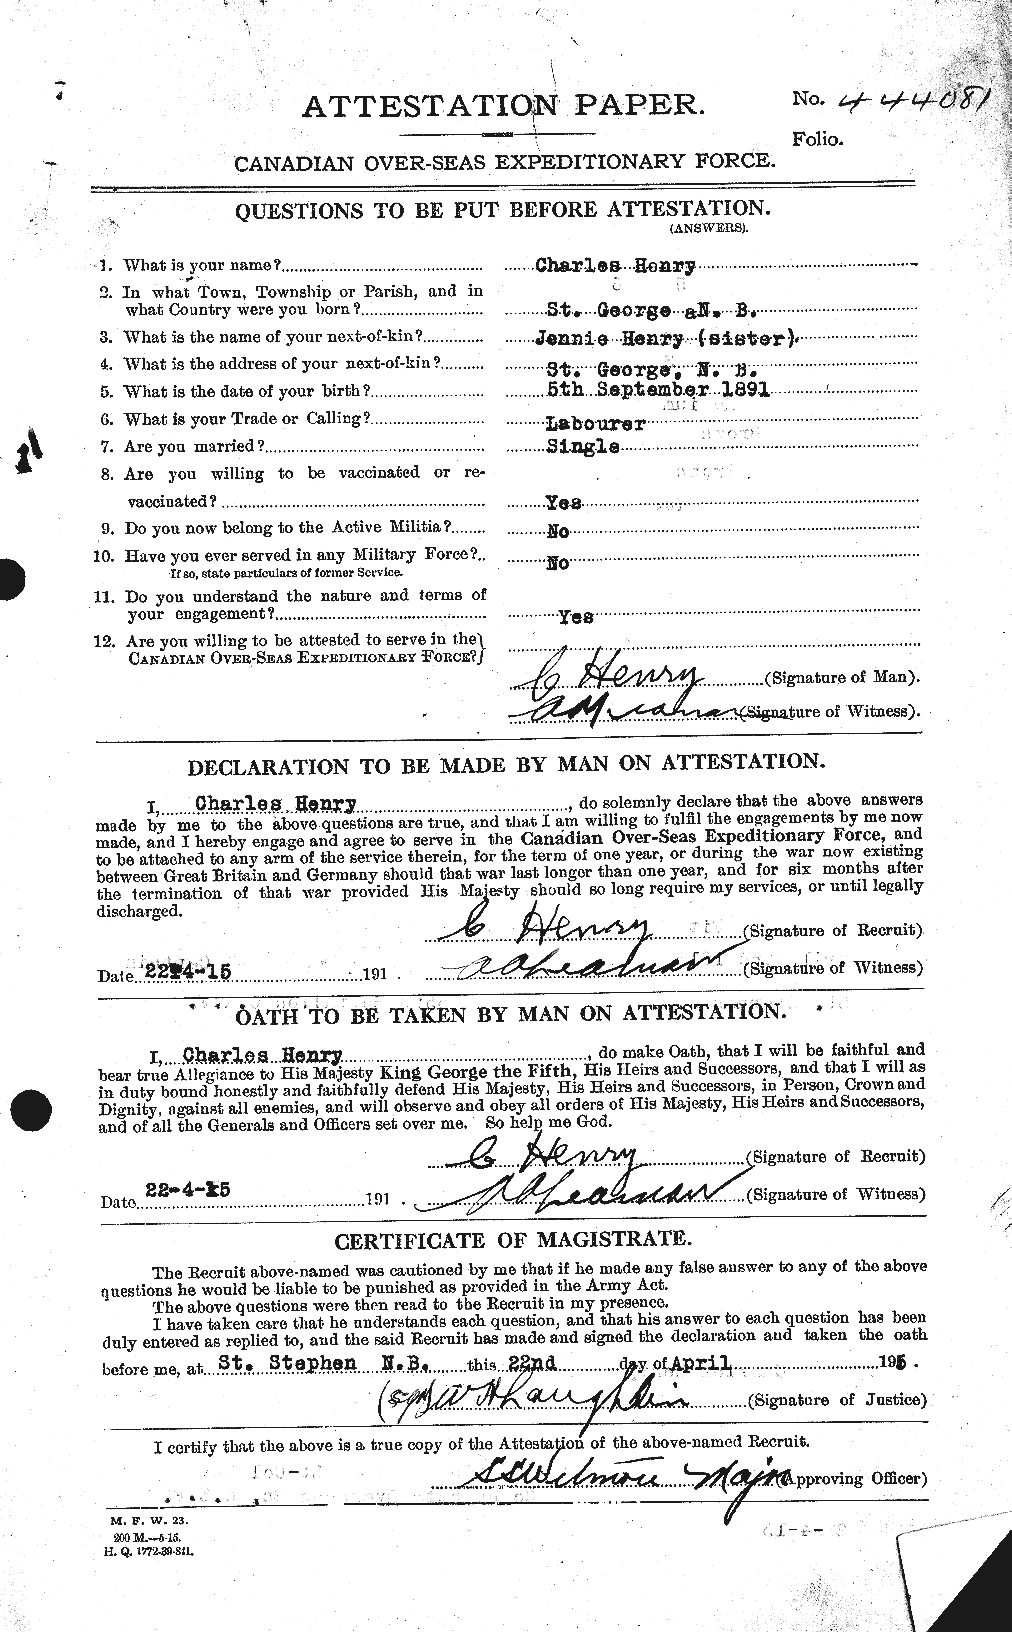 Personnel Records of the First World War - CEF 392799a